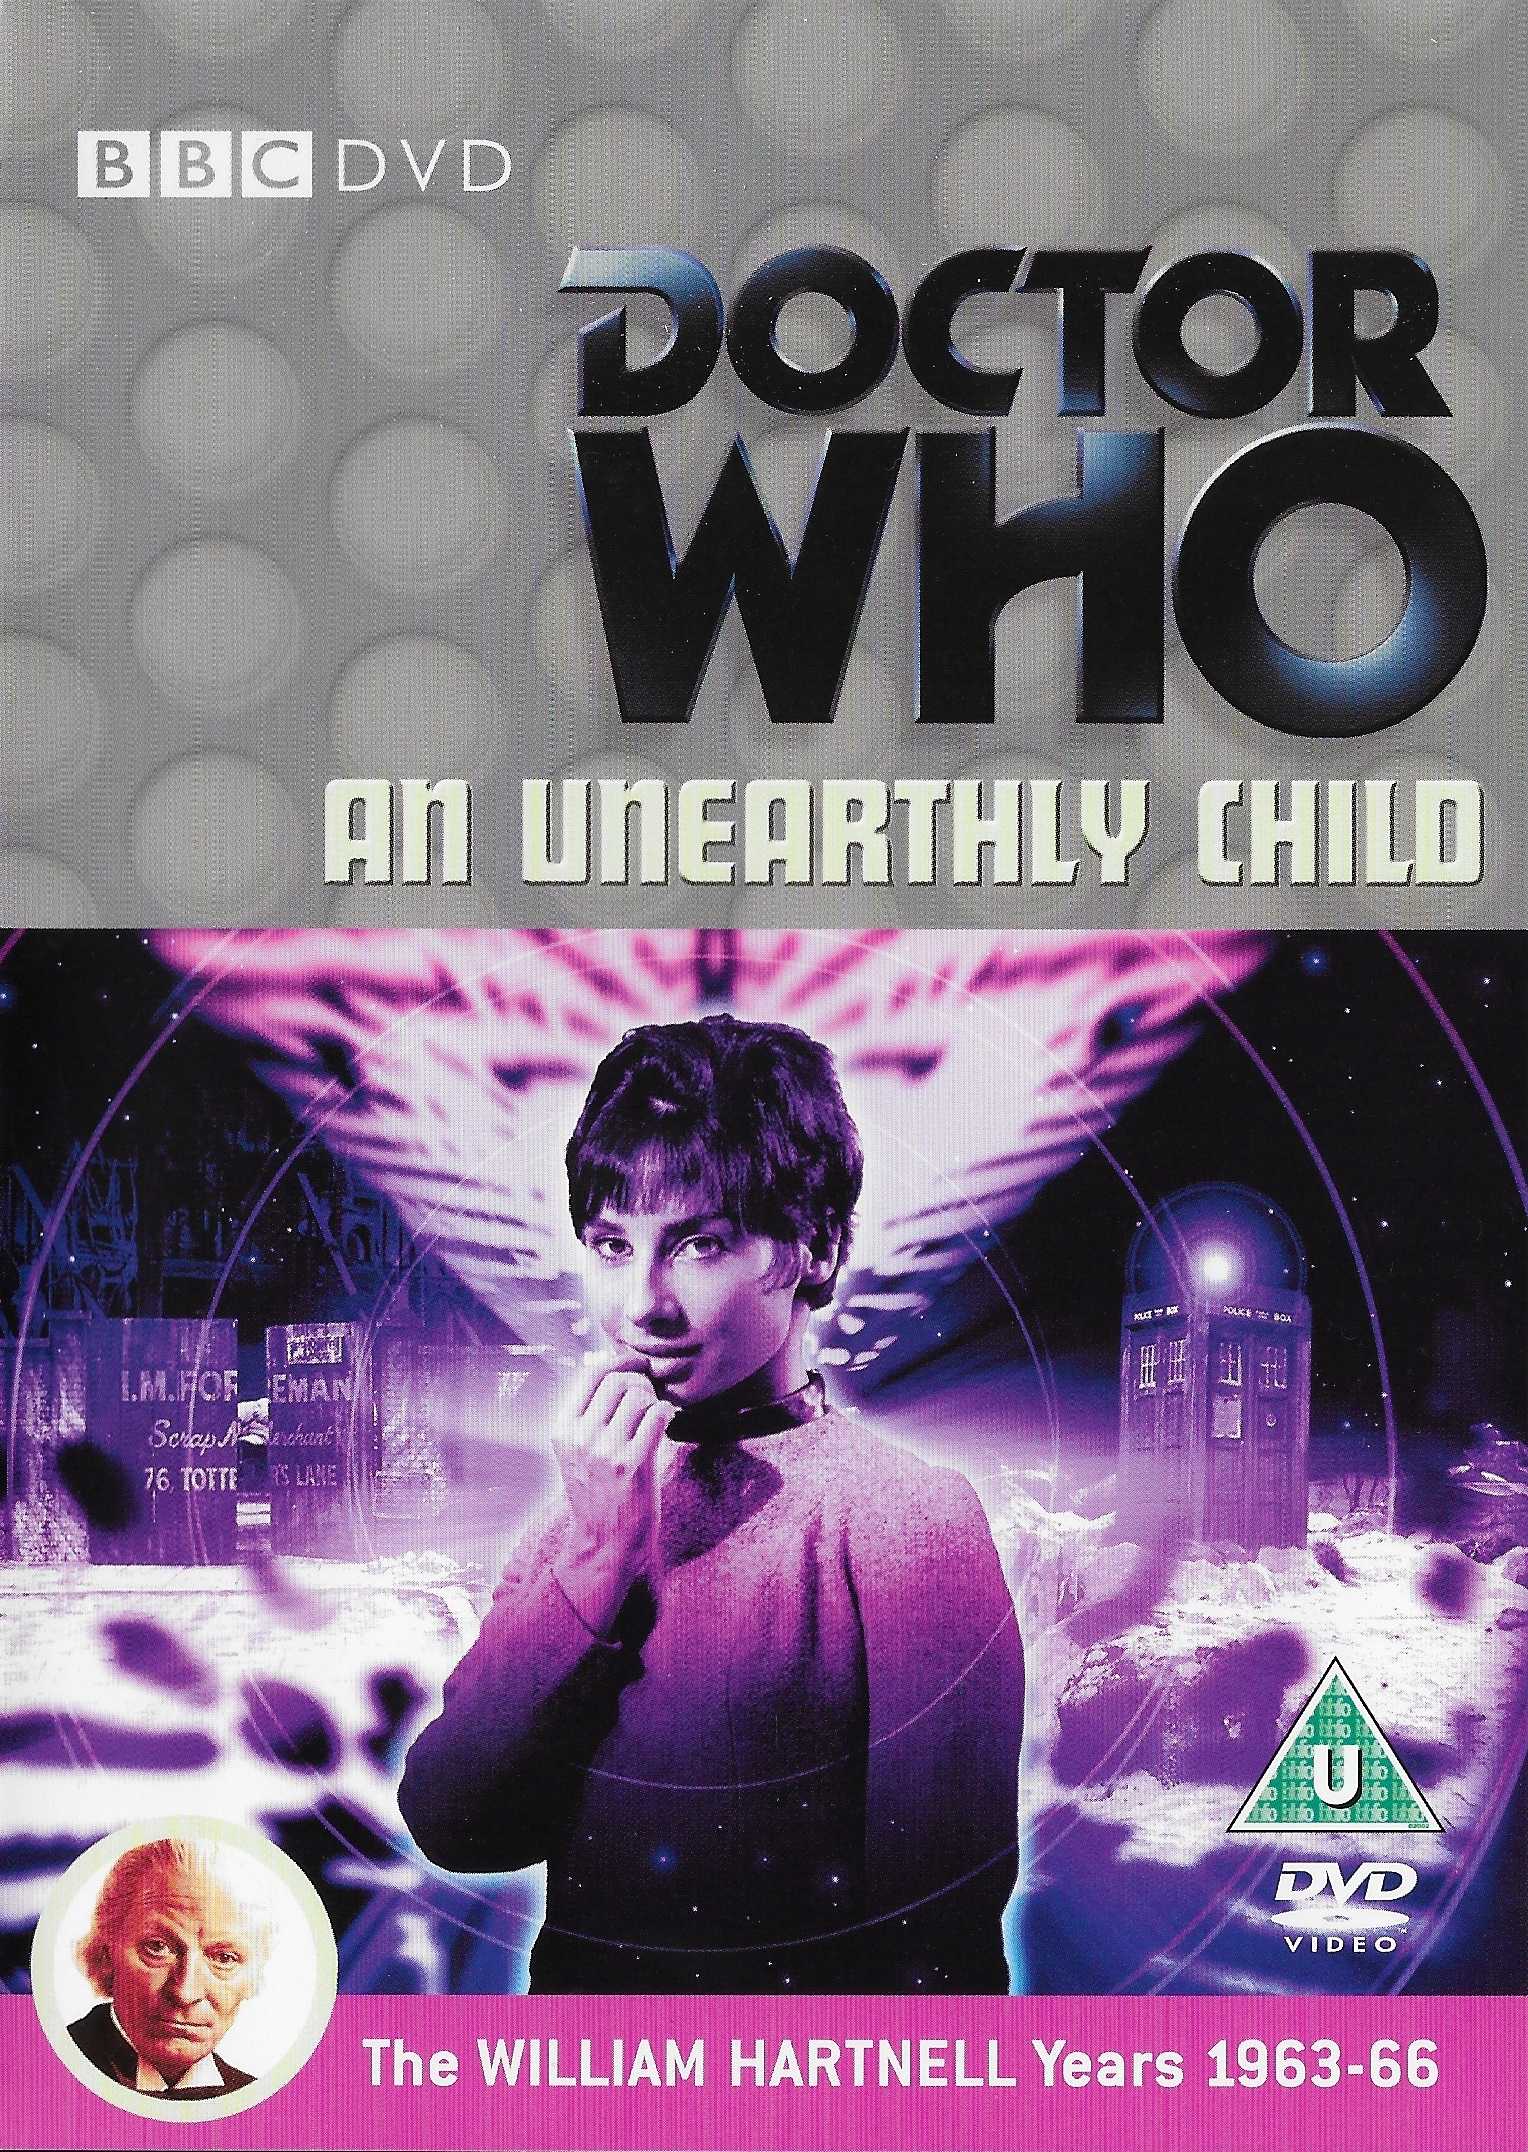 Picture of BBCDVD 1882A Doctor Who - An unearthly child by artist Anthony Coburn from the BBC dvds - Records and Tapes library